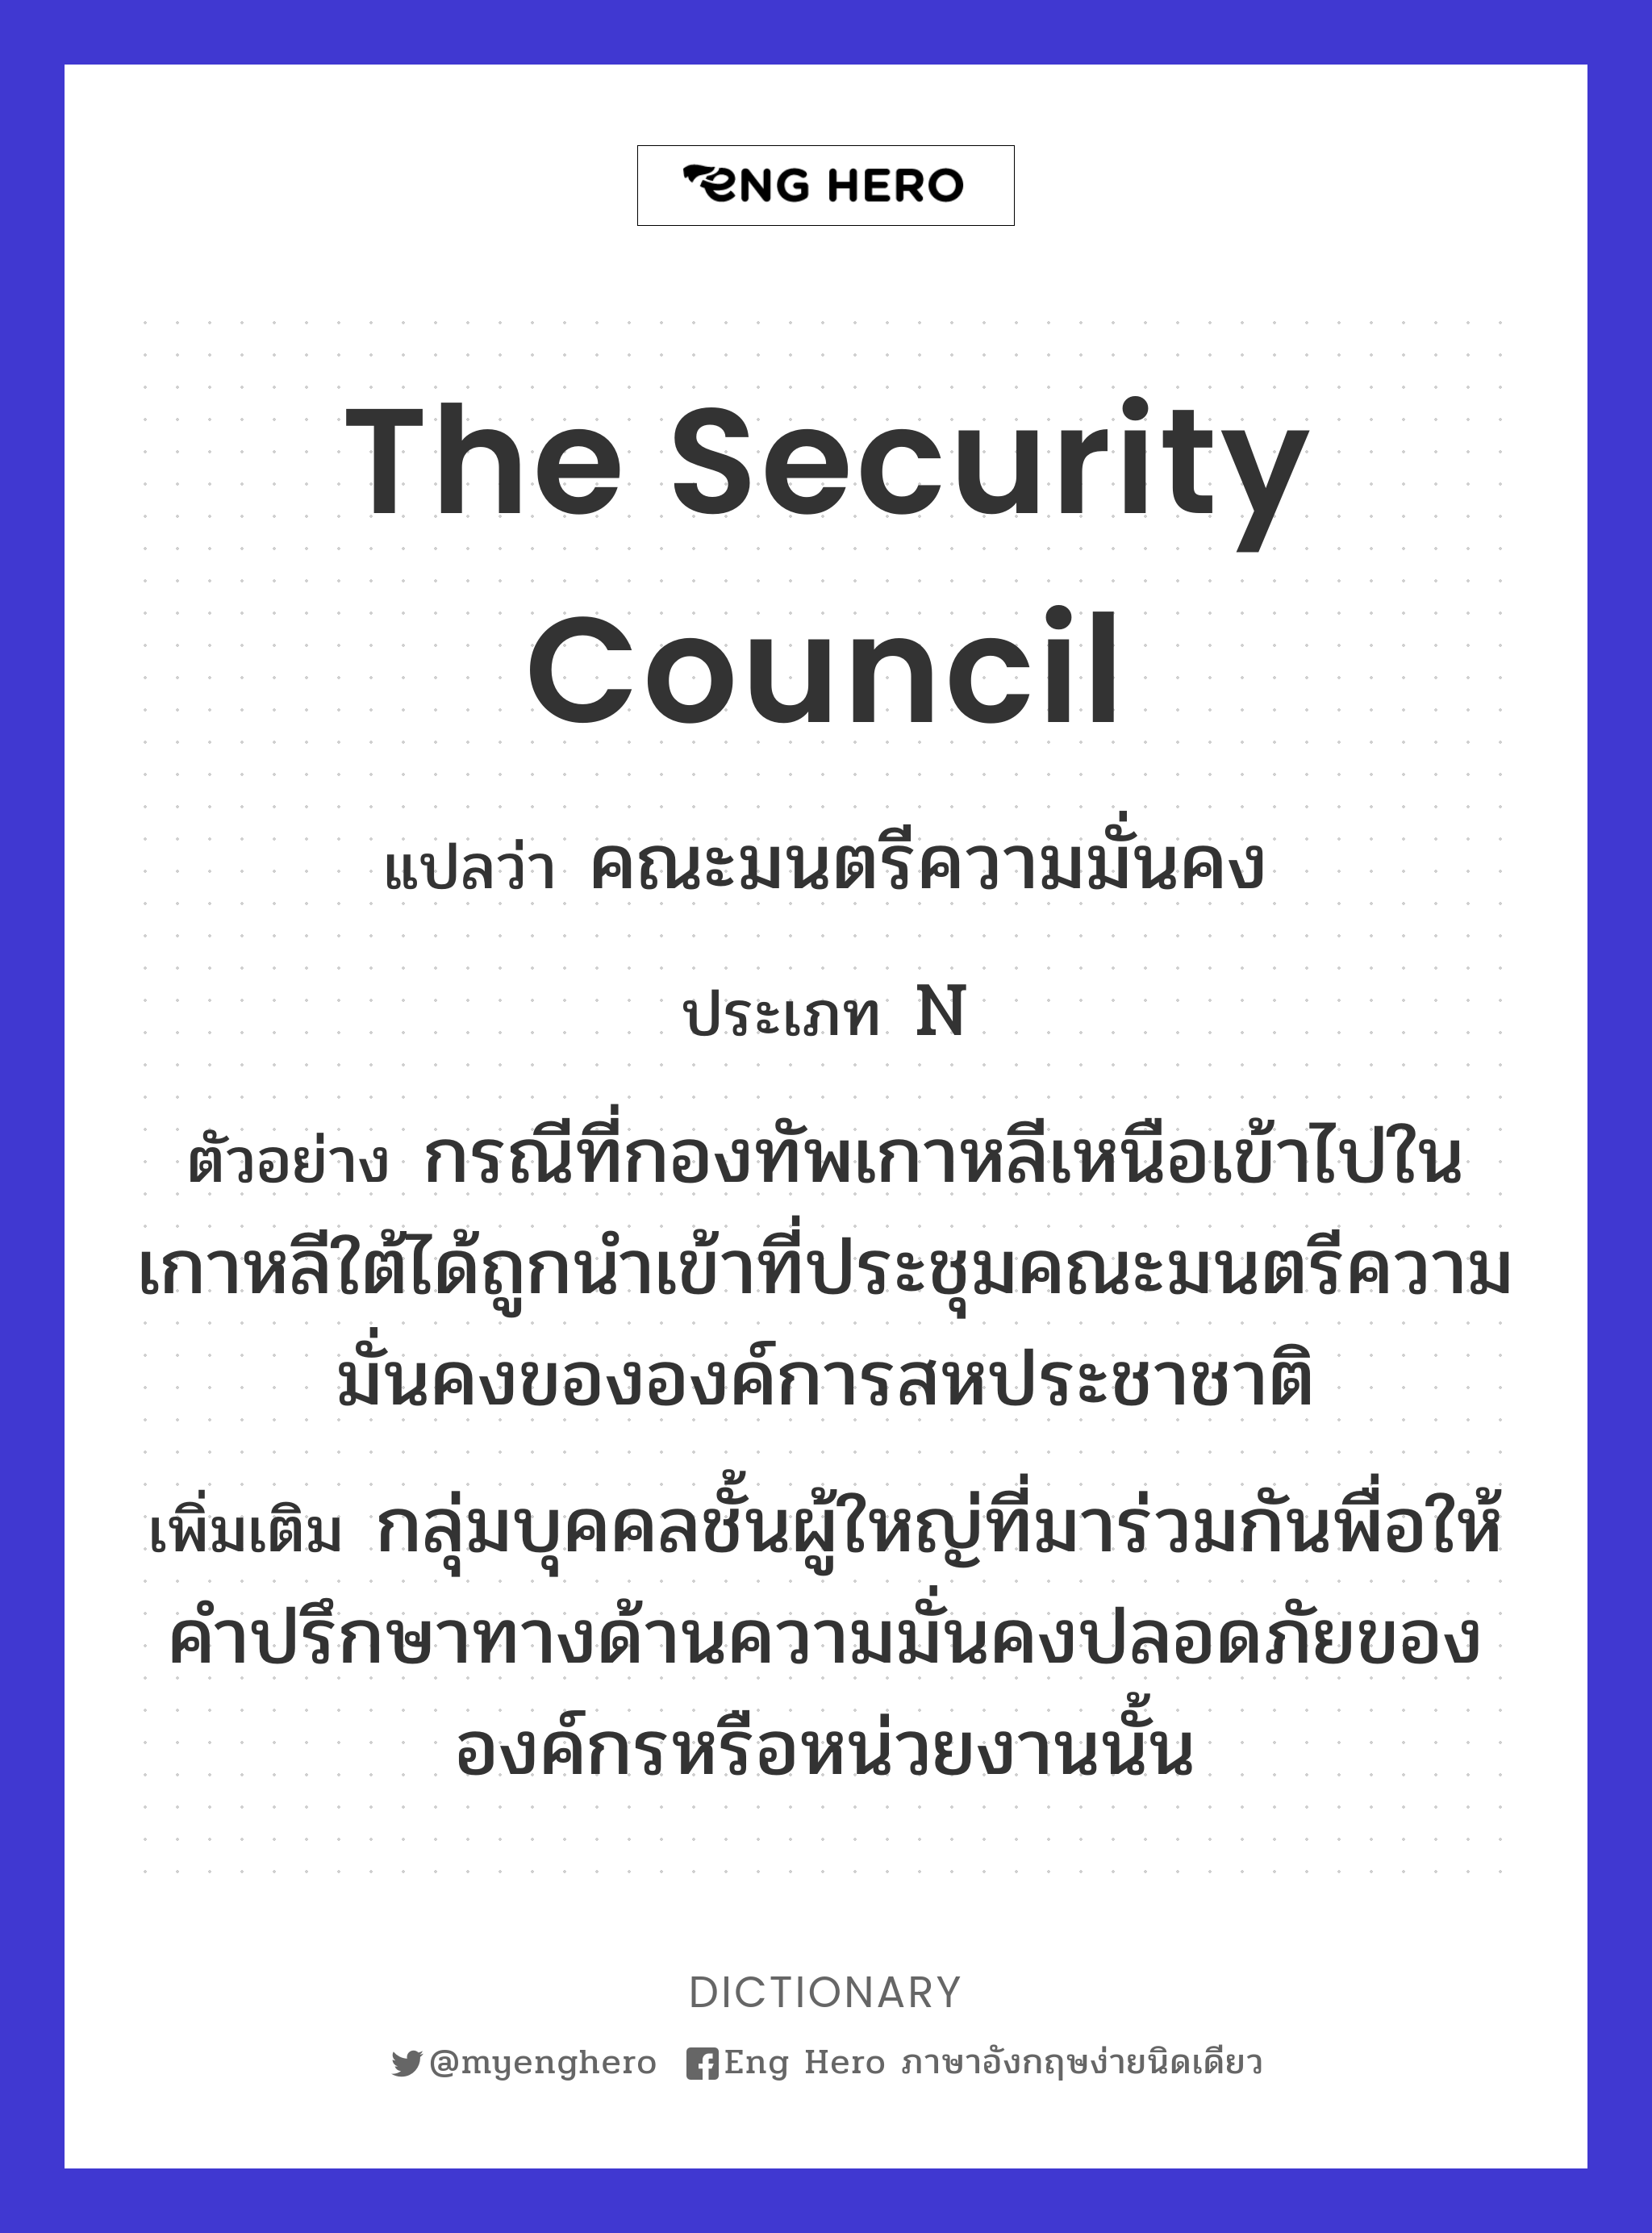 The Security Council